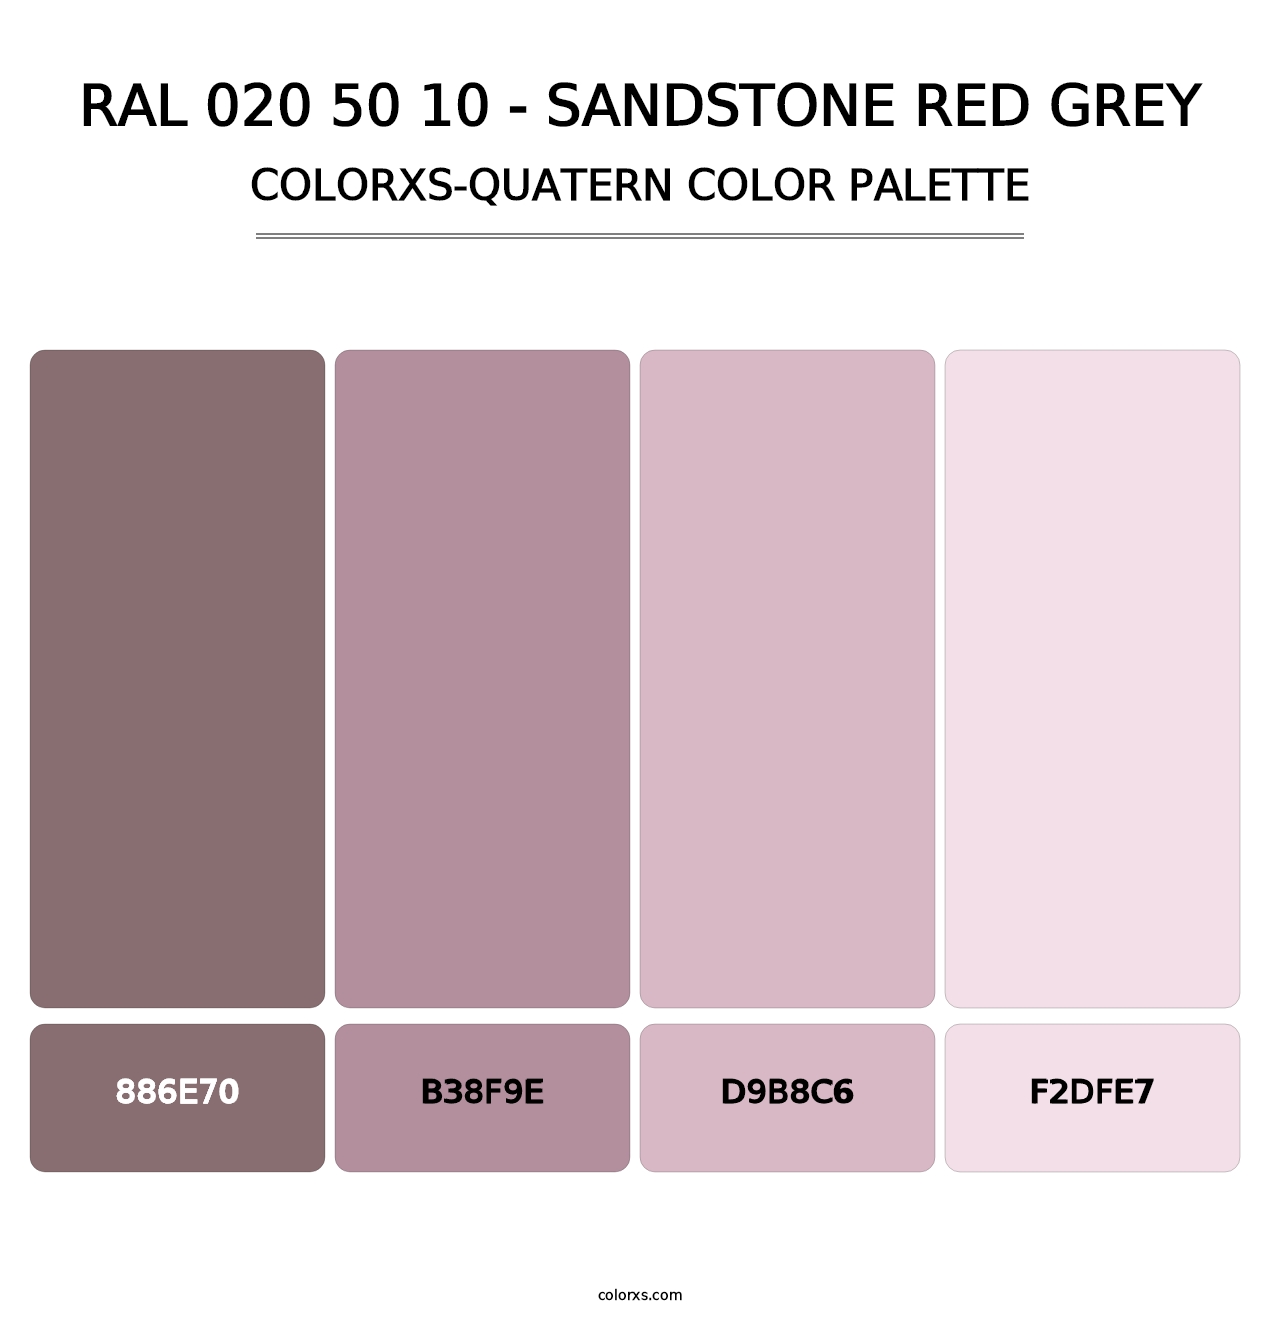 RAL 020 50 10 - Sandstone Red Grey - Colorxs Quatern Palette